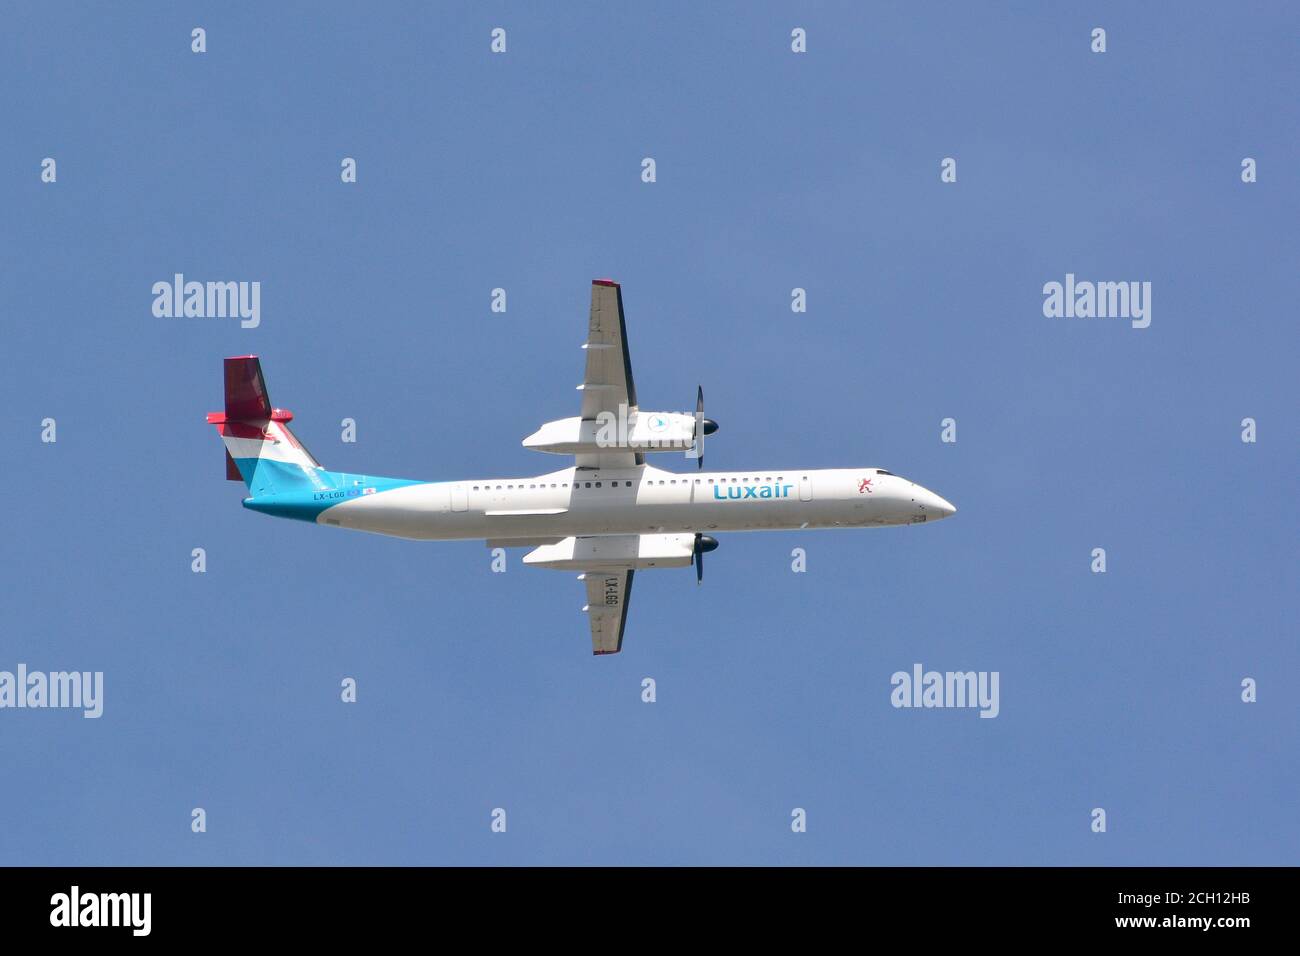 Luxair (is the flag carrier airline of Luxembourg), De Havilland Canada Dash airplane Stock Photo